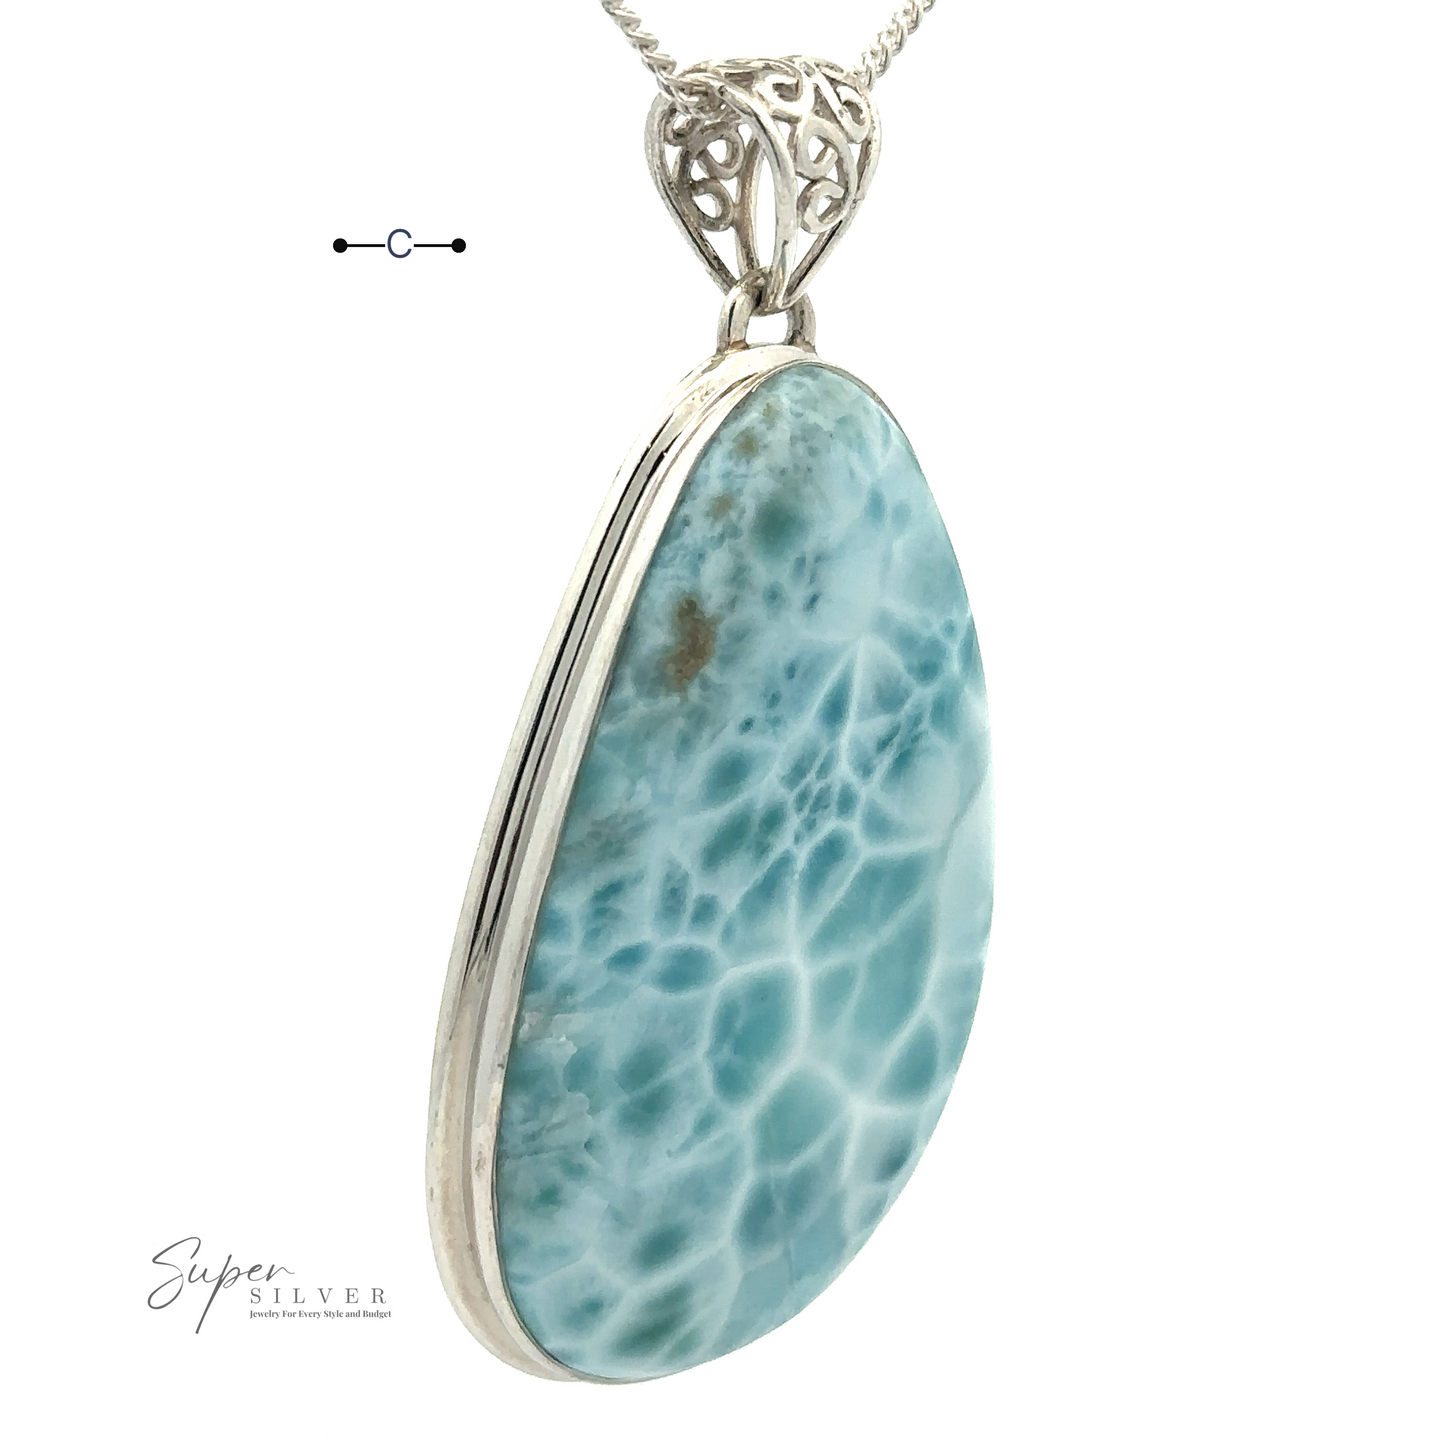 
                  
                    A Freeform Large Larimar Pendant encased in sterling silver hangs from an ornate silver chain. The stone features a striking pattern of light blue and white veins. "Super Silver" is inscribed at the bottom left.
                  
                